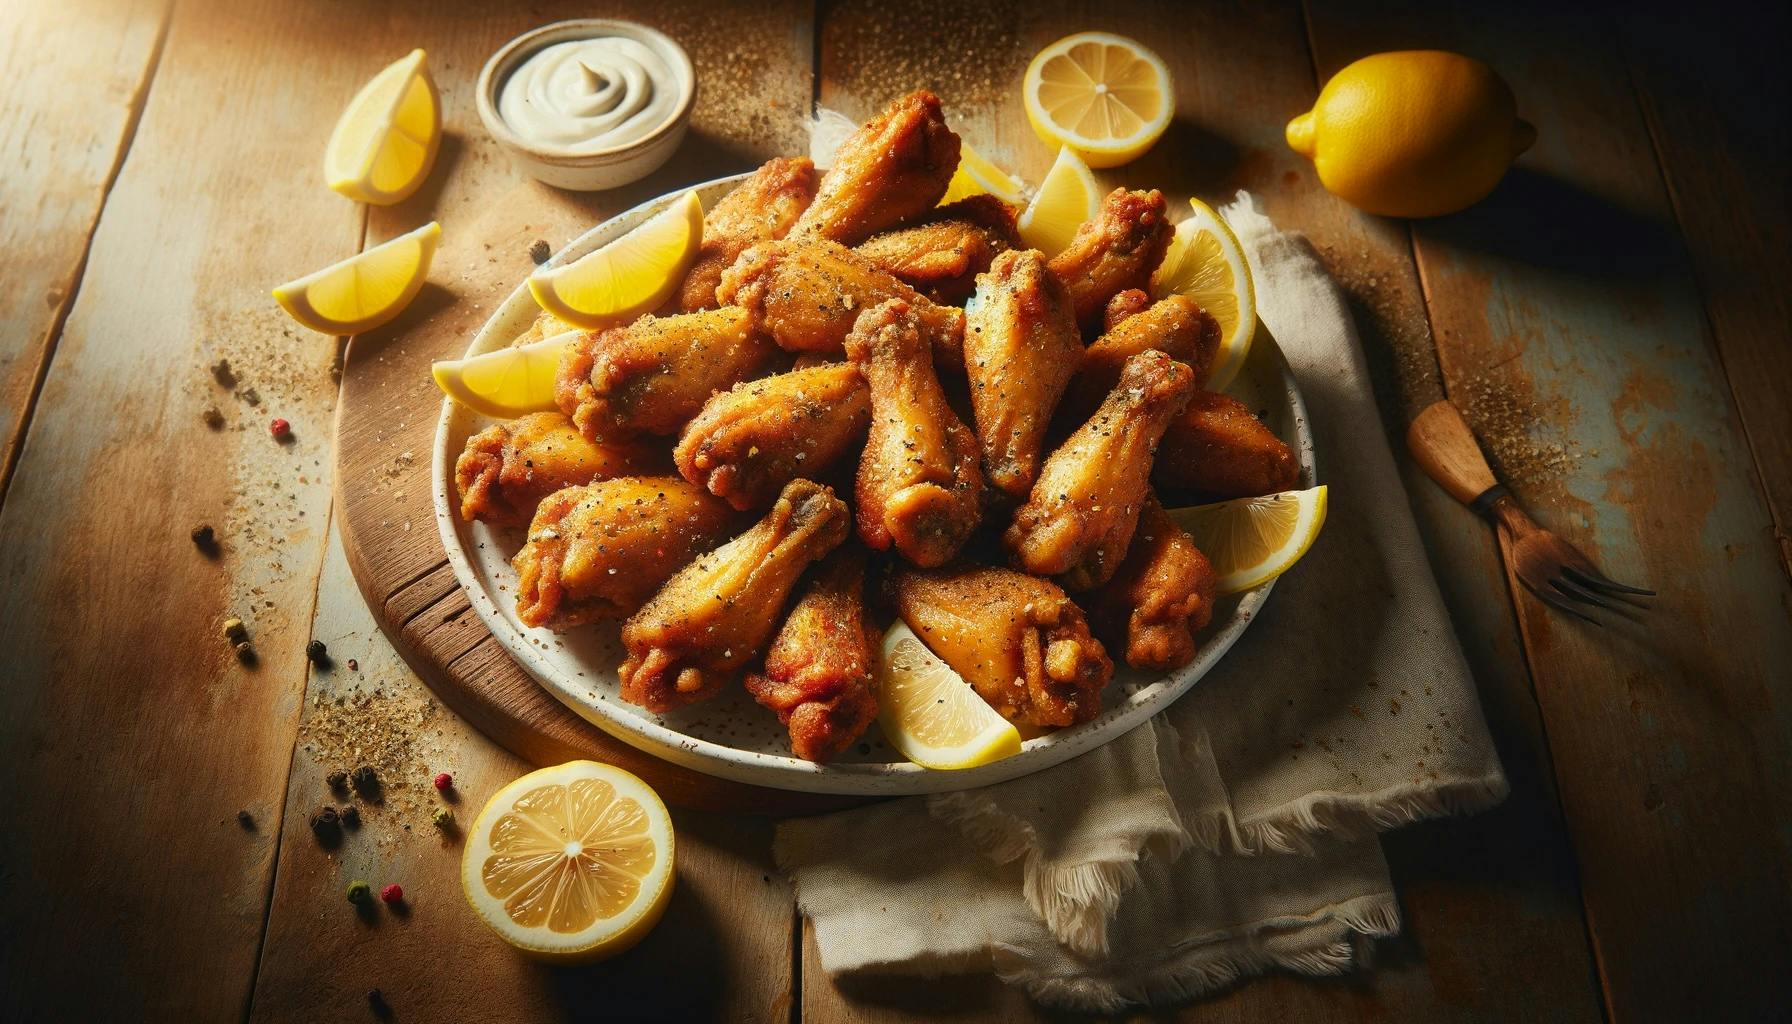 Crispy, tangy, spicy, and tart—these lemon pepper wings are sure to satisfy all your cravings! Making them at home is remarkably easy and takes just a few steps.